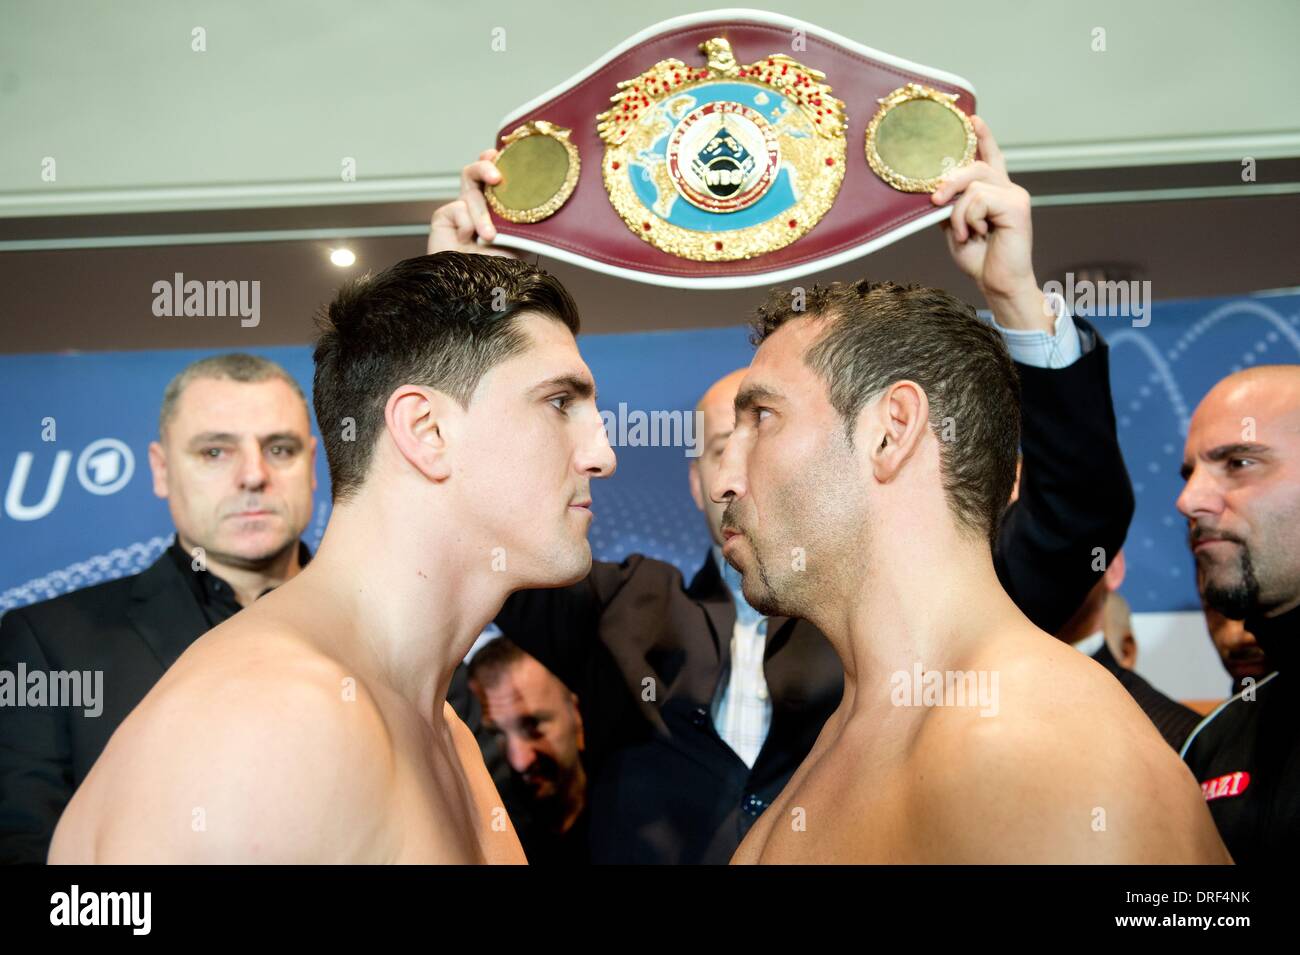 Stuttgart, Germany. 24th Jan, 2014. German WBO Cruiserweight Champion Marco Huck (L) and challenger Firat Arslan face off during the official weighing in Stuttgart, Germany, 24 January 2014. The WBO Cruiserweight Championship bout will take place on 25 January. Photo: SEBASTIAN KAHNERT/dpa/Alamy Live News Stock Photo